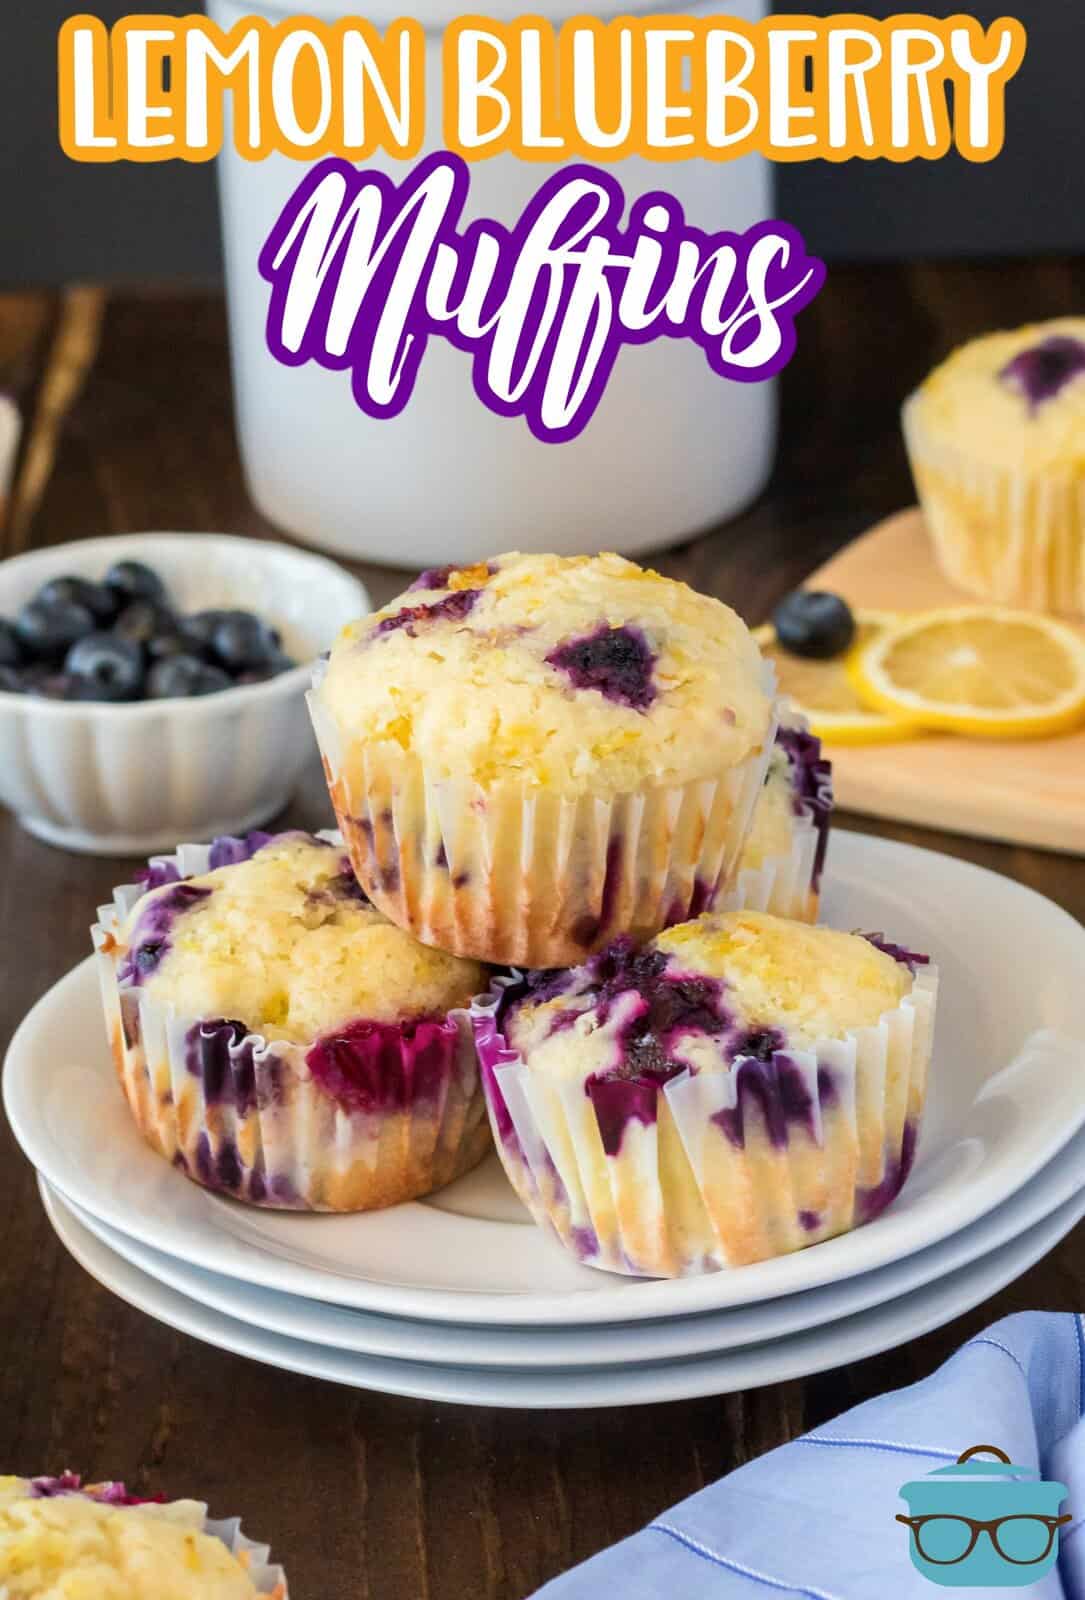 Stacked Lemon Blueberry Muffins on white plate.